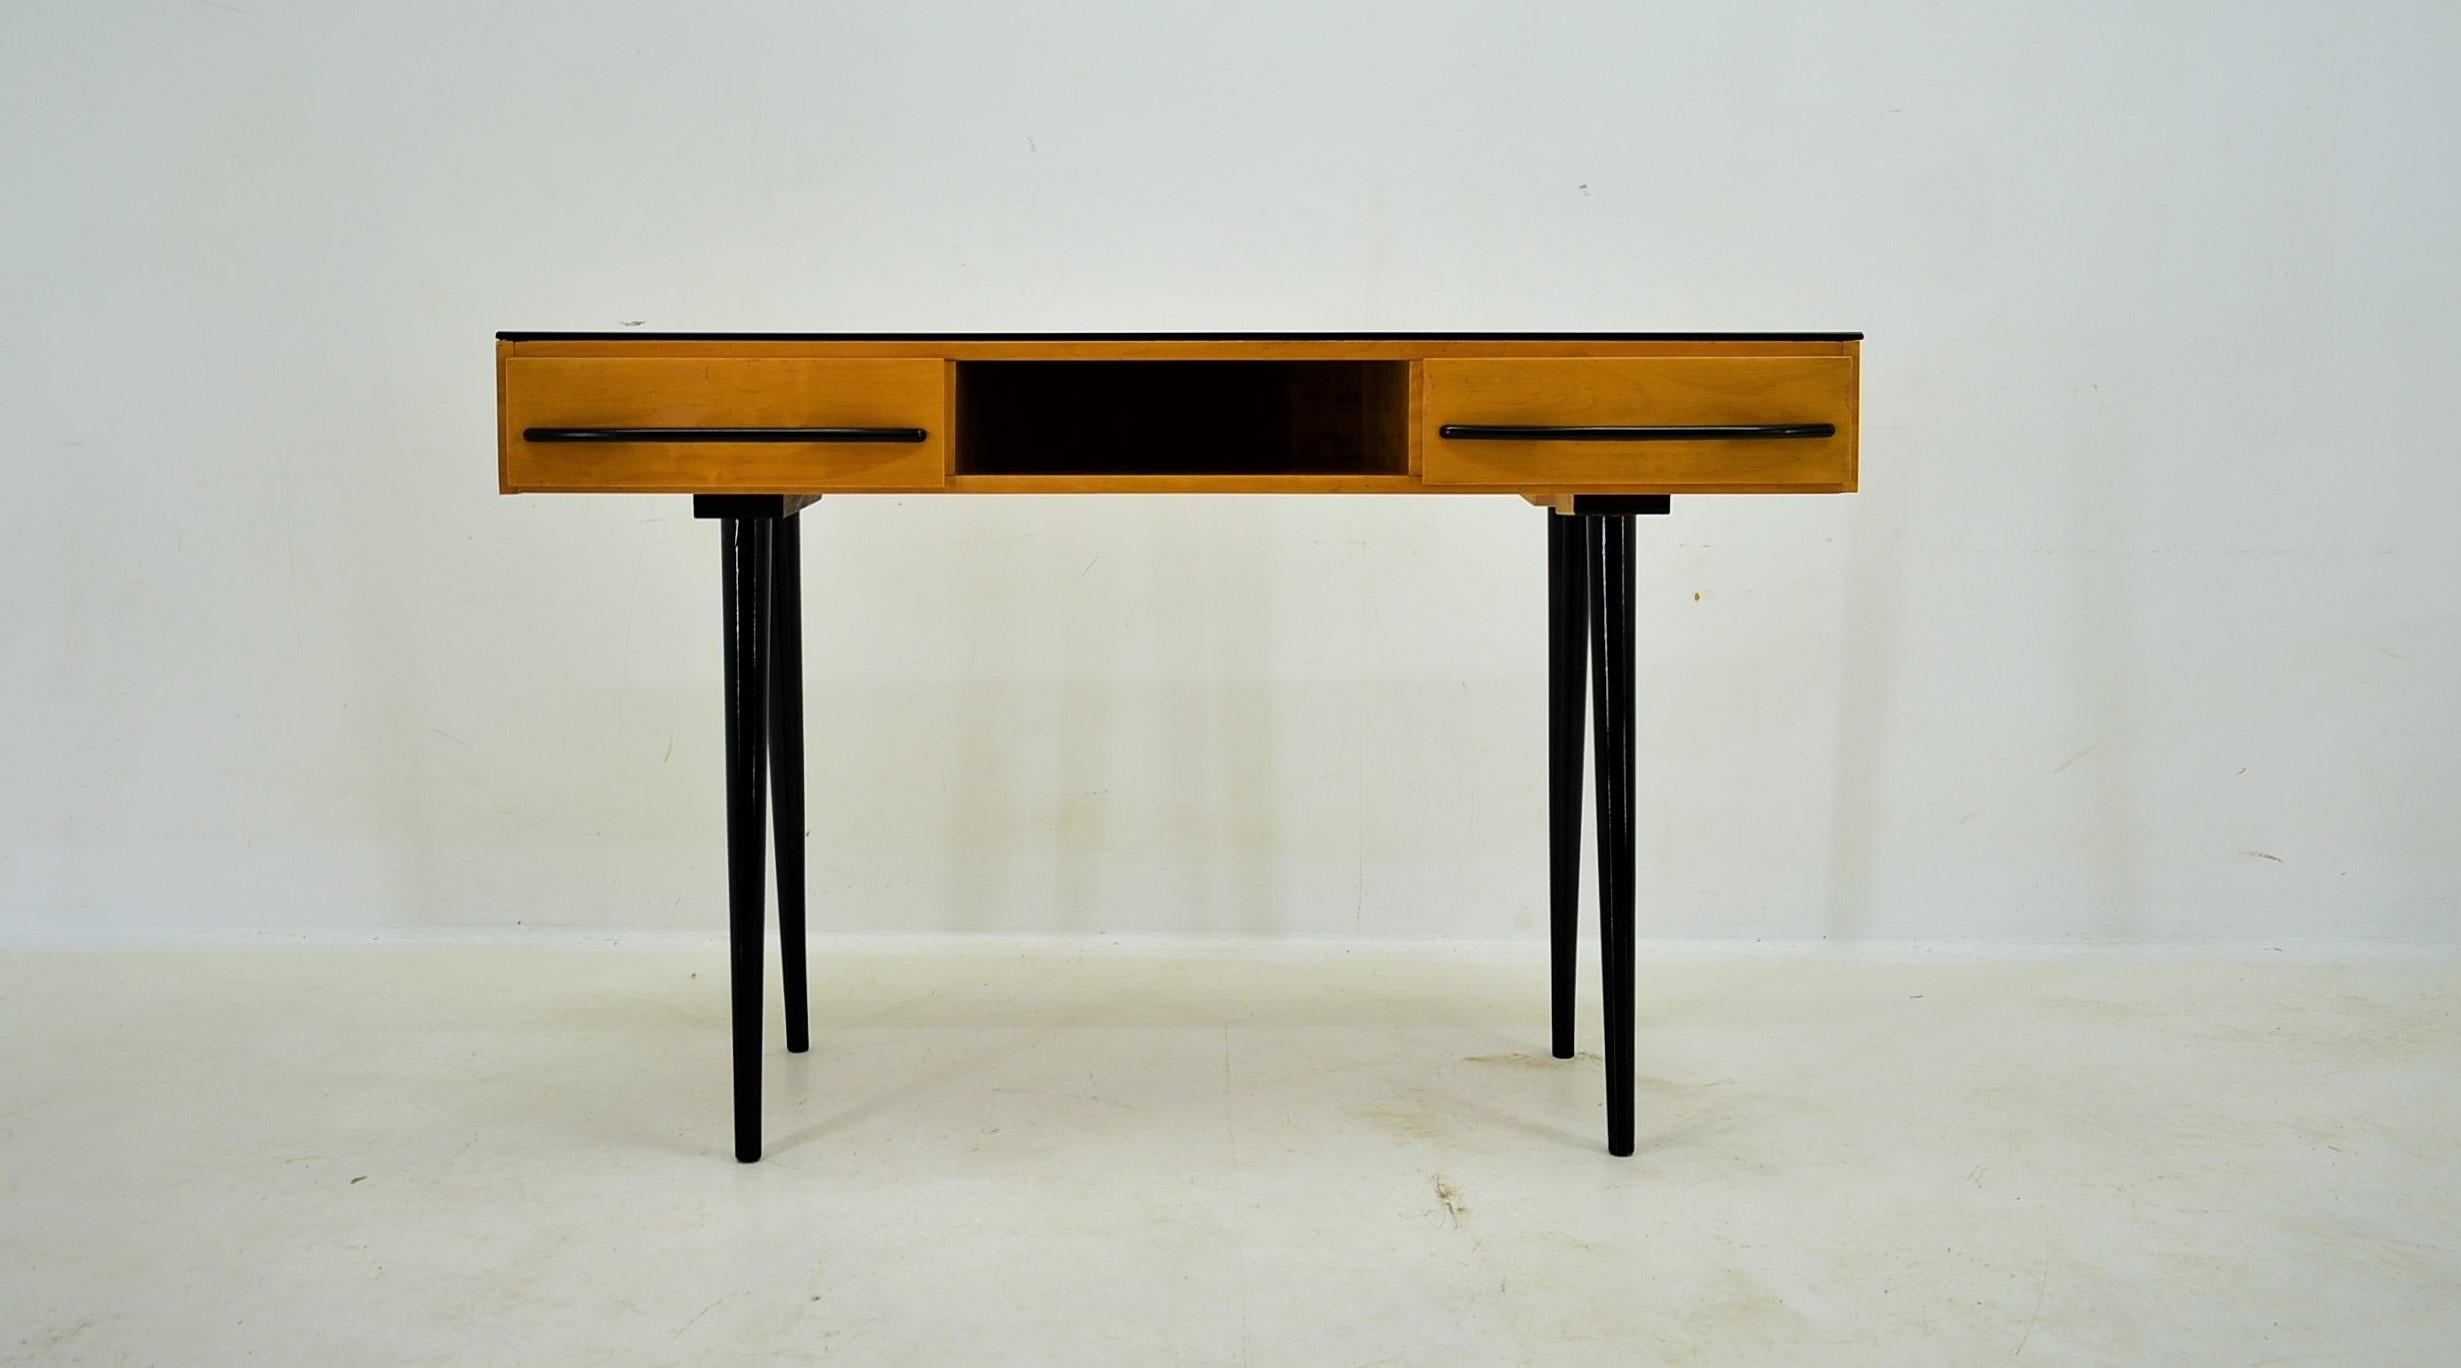 Made in Czechoslovakia
Made of wood, glass , plastic
The legs are removable
Good Original condition.
Cleaned